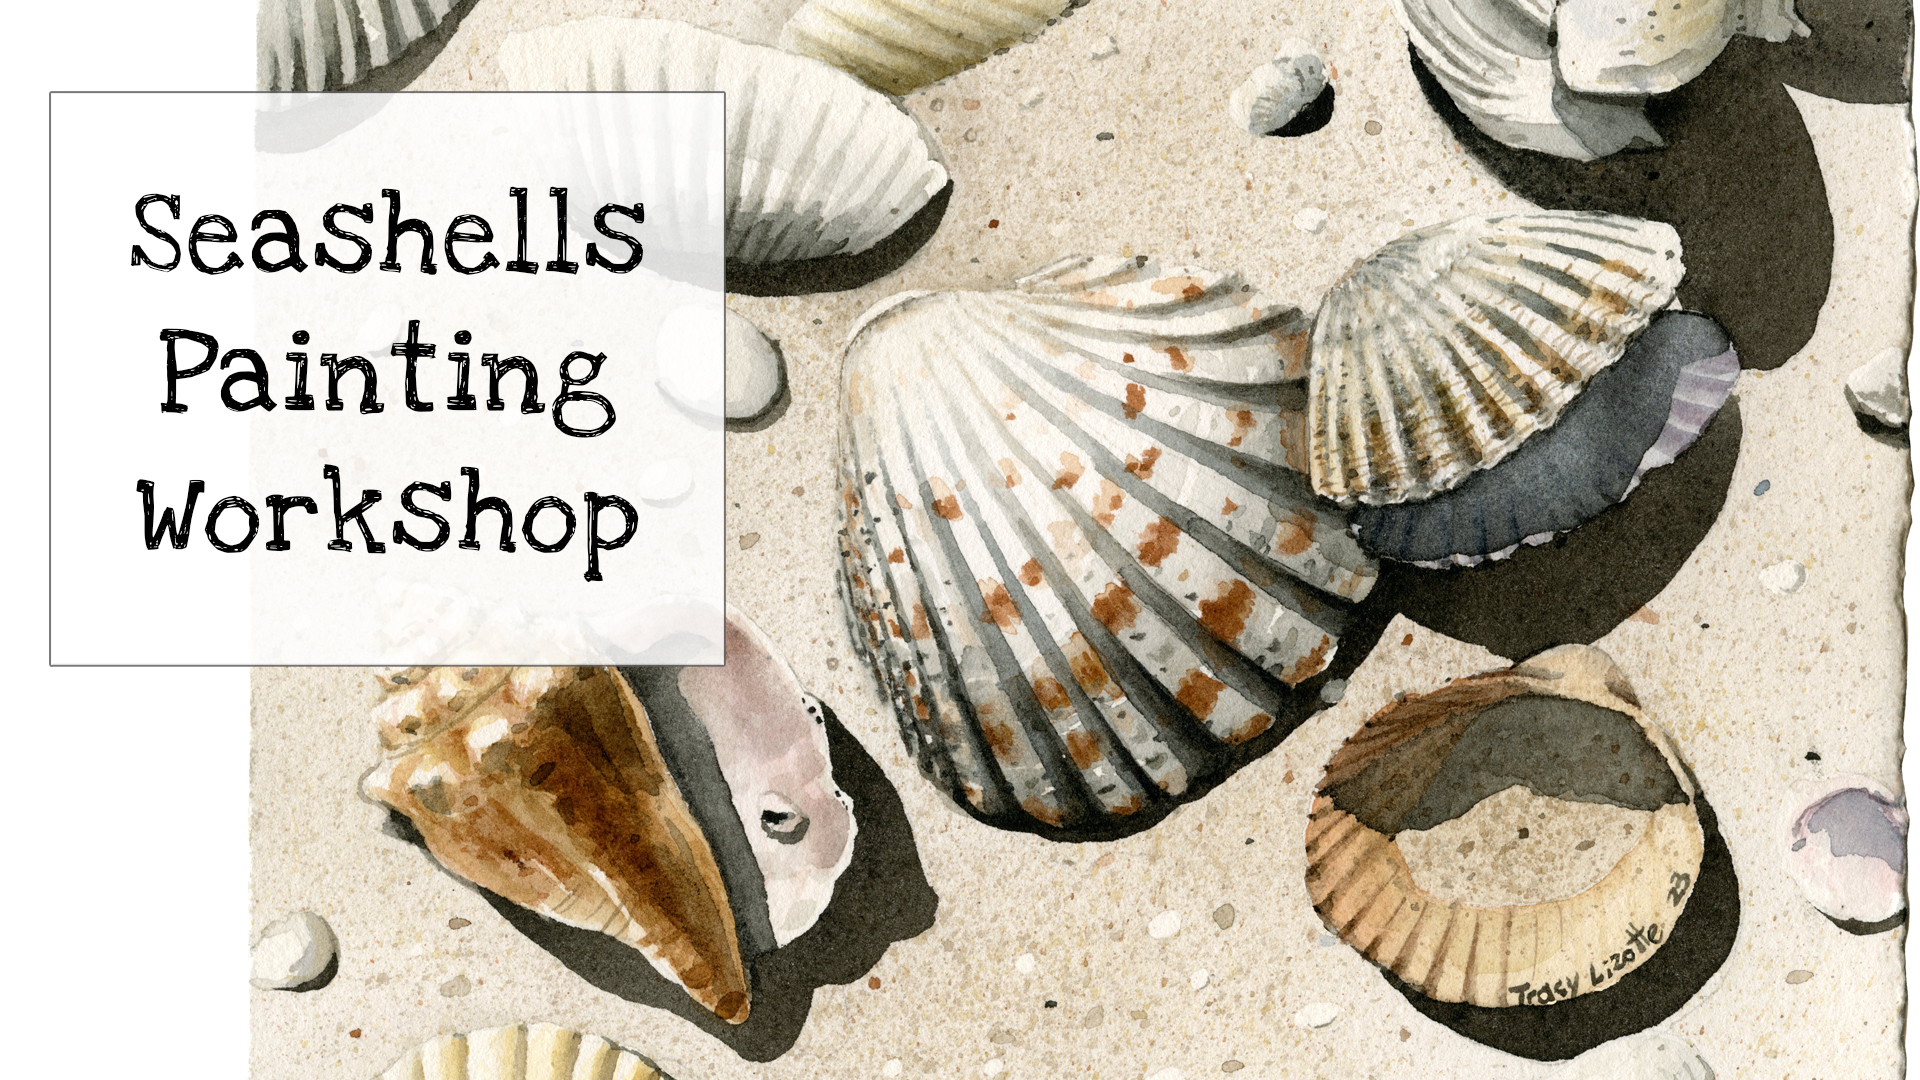 Learn to paint realistic seashells with watercolors